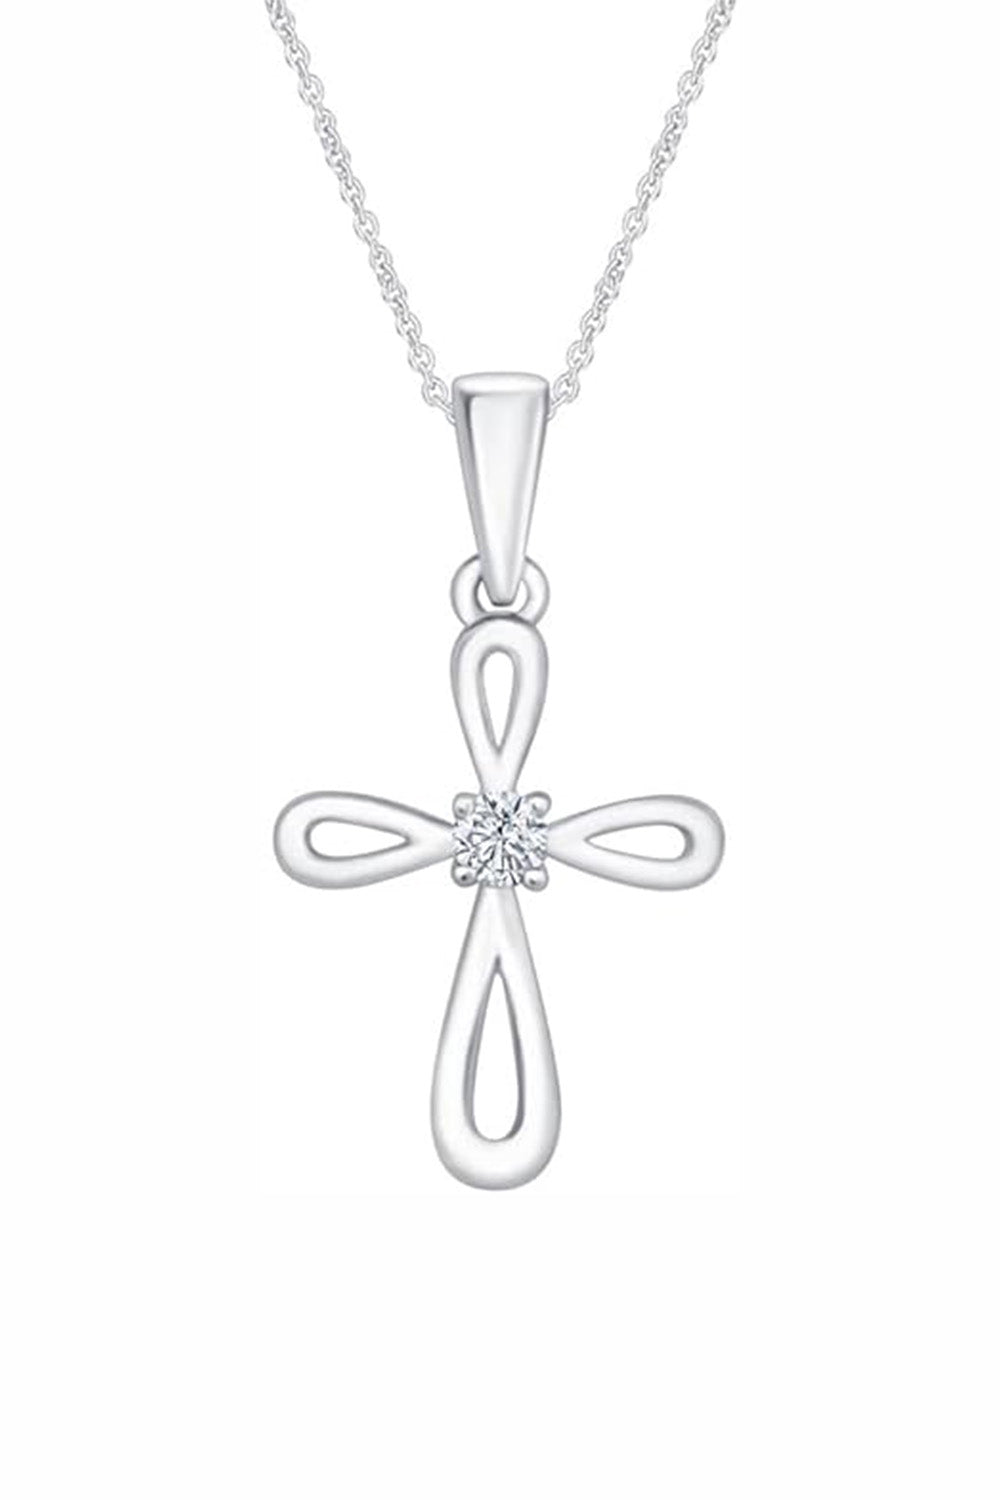 White Gold Color Stylish Open Cross Pendant Necklace for Women 